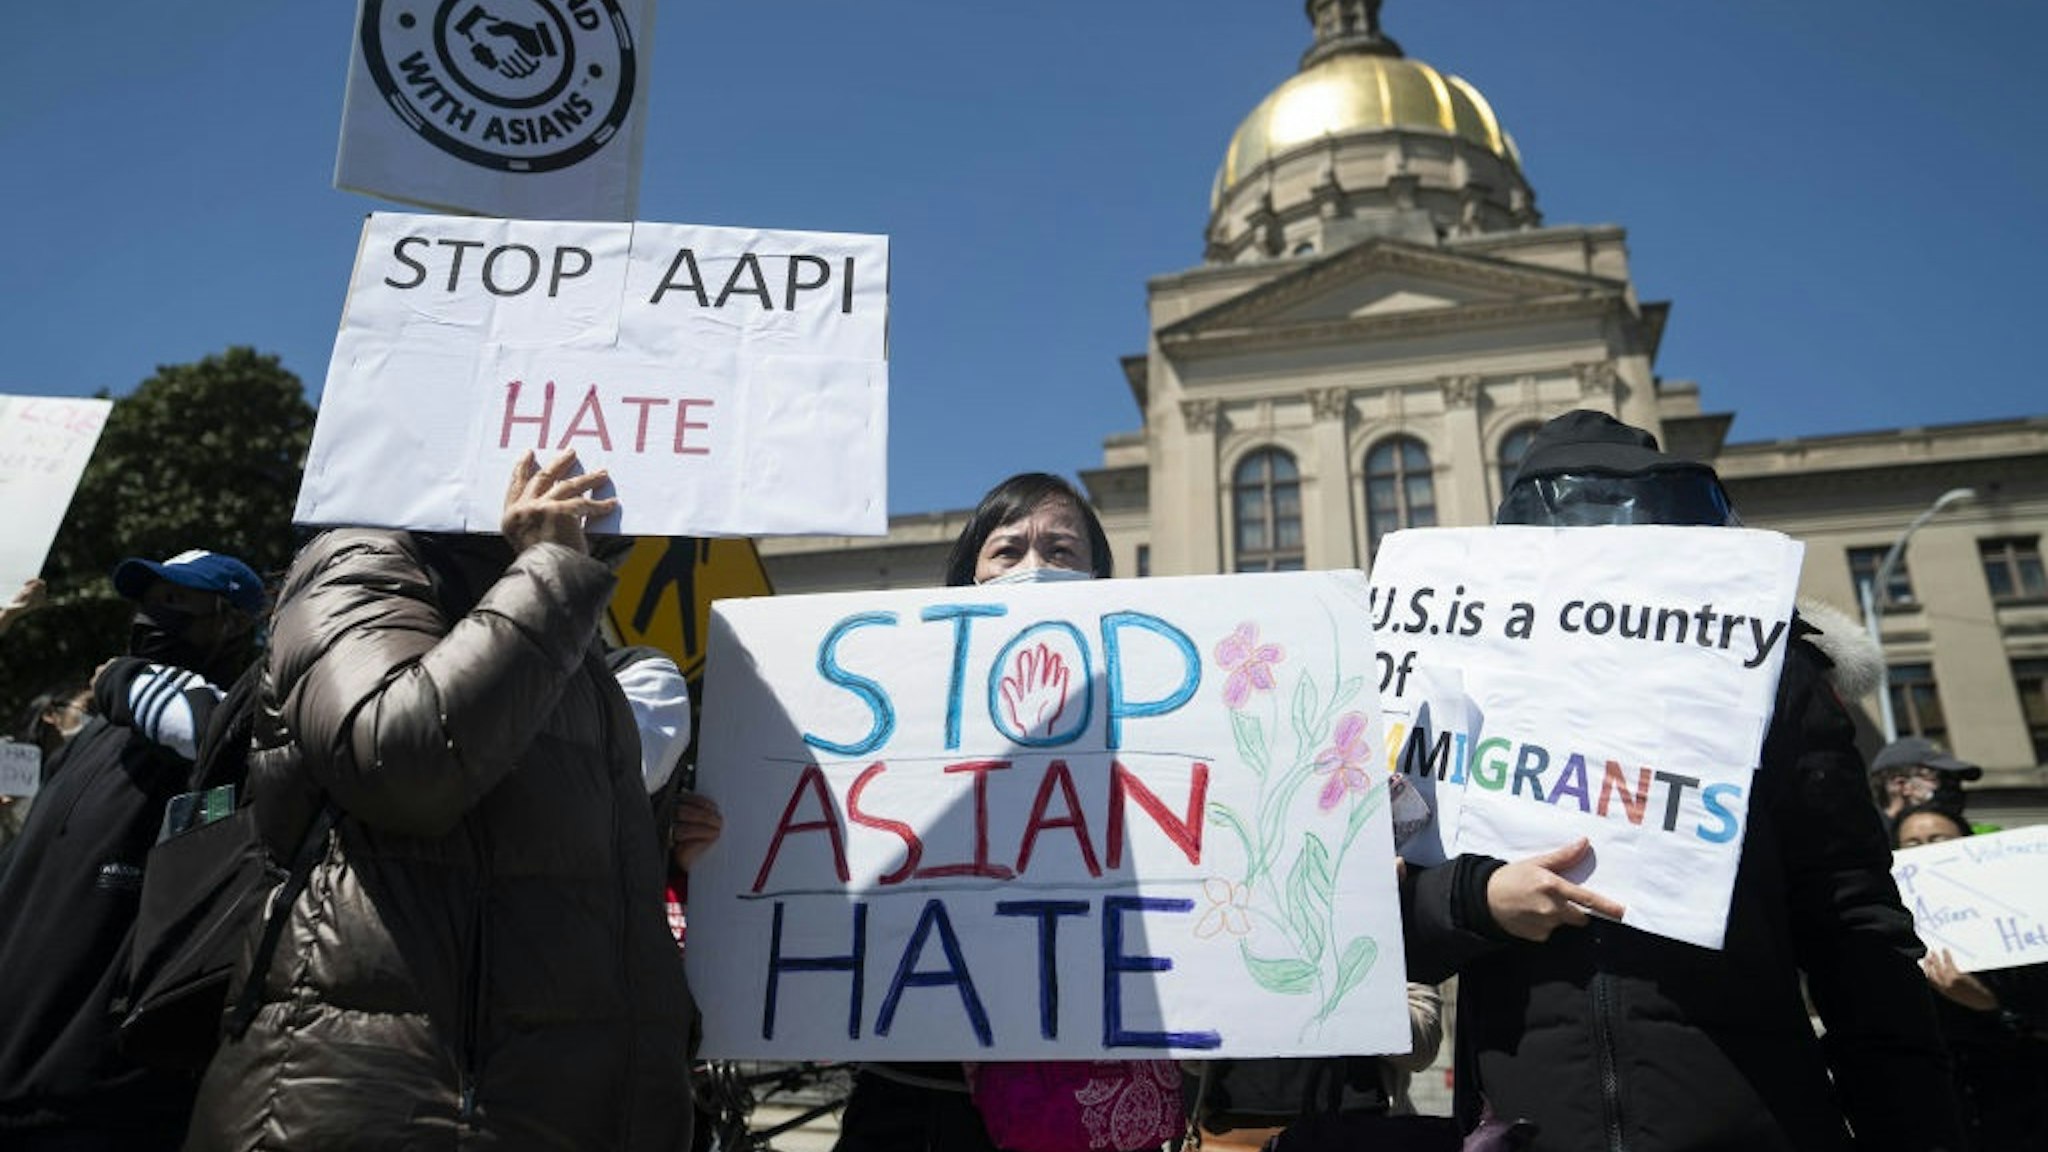 Demonstrators hold signs during a Stop AAPI Hate Rally outside the State Capitol building in Atlanta, Georgia, U.S., on Saturday, March 20, 2021.